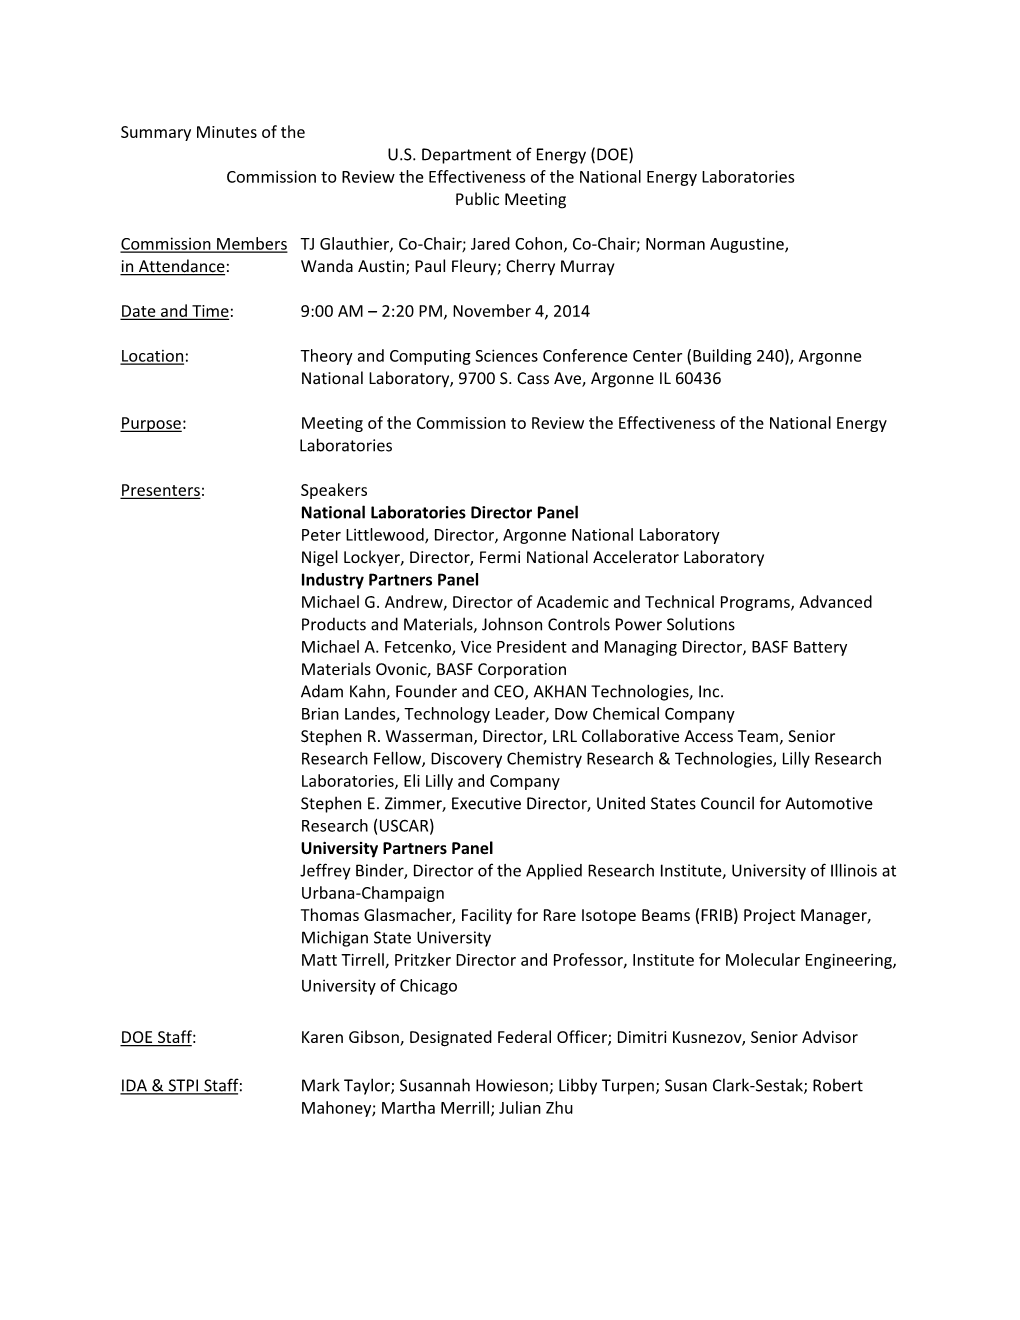 Summary Minutes of the U.S. Department of Energy (DOE) Commission to Review the Effectiveness of the National Energy Laboratories Public Meeting